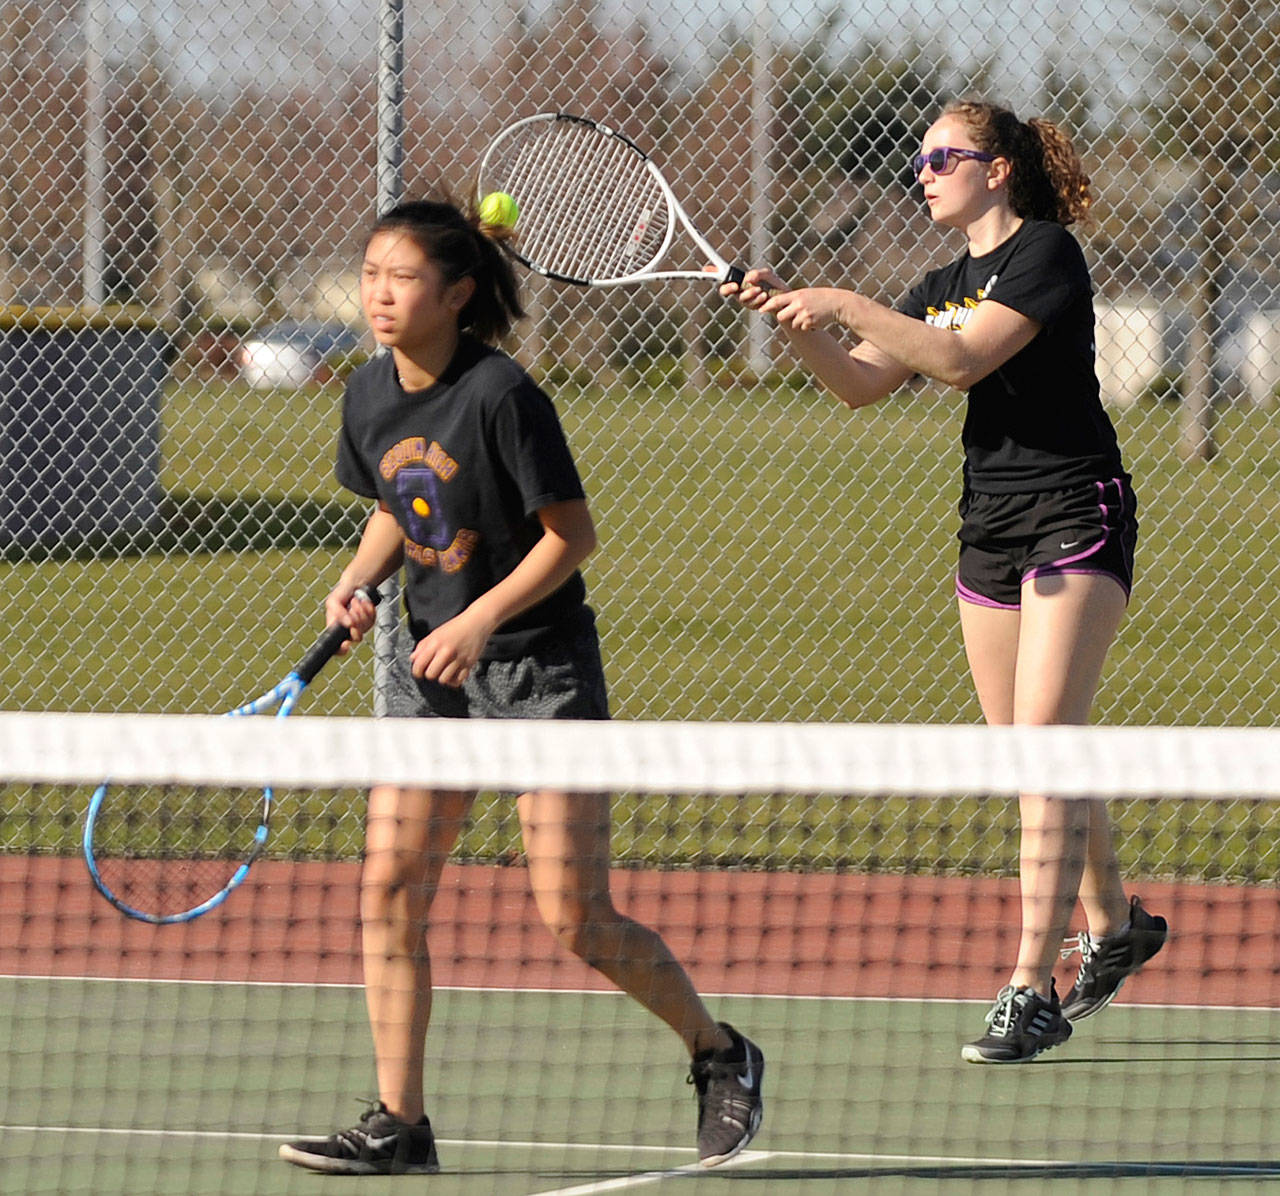 Sequim’s Arlene Law, right, returns a volley as she and doubles partner Amanda He take on a Kingston doubles team in March. Law and He survived a three-set battle in the opening round of the Olympic League tournament on May 9, coming back from a 5-1 deficit in the third set to win the next six points. Sequim Gazette file photo by Michael Dashiell